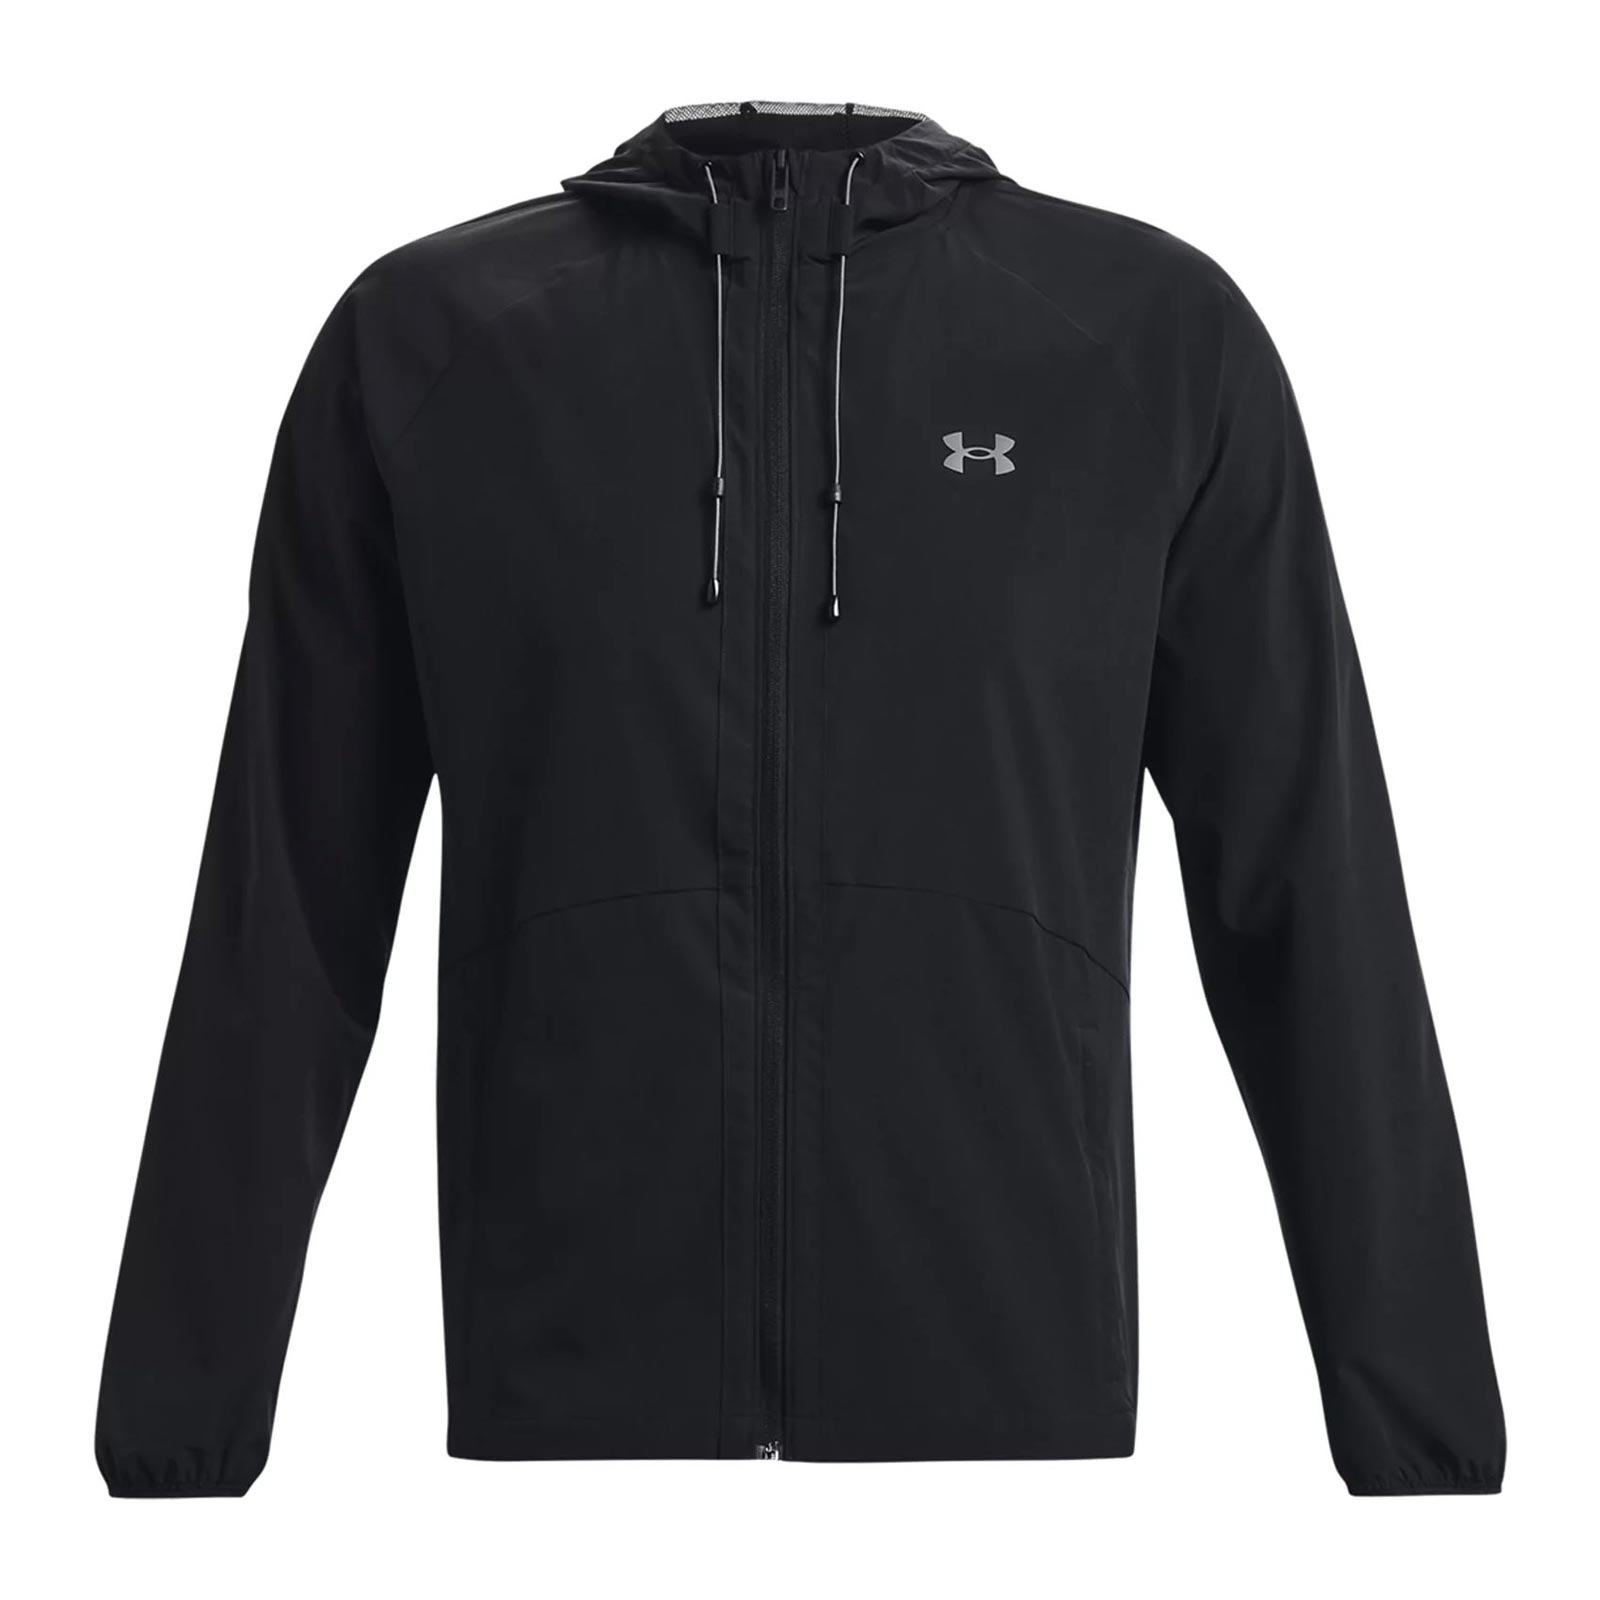 UNDER ARMOUR MENS STRETCH WOVEN WINDBREAKER